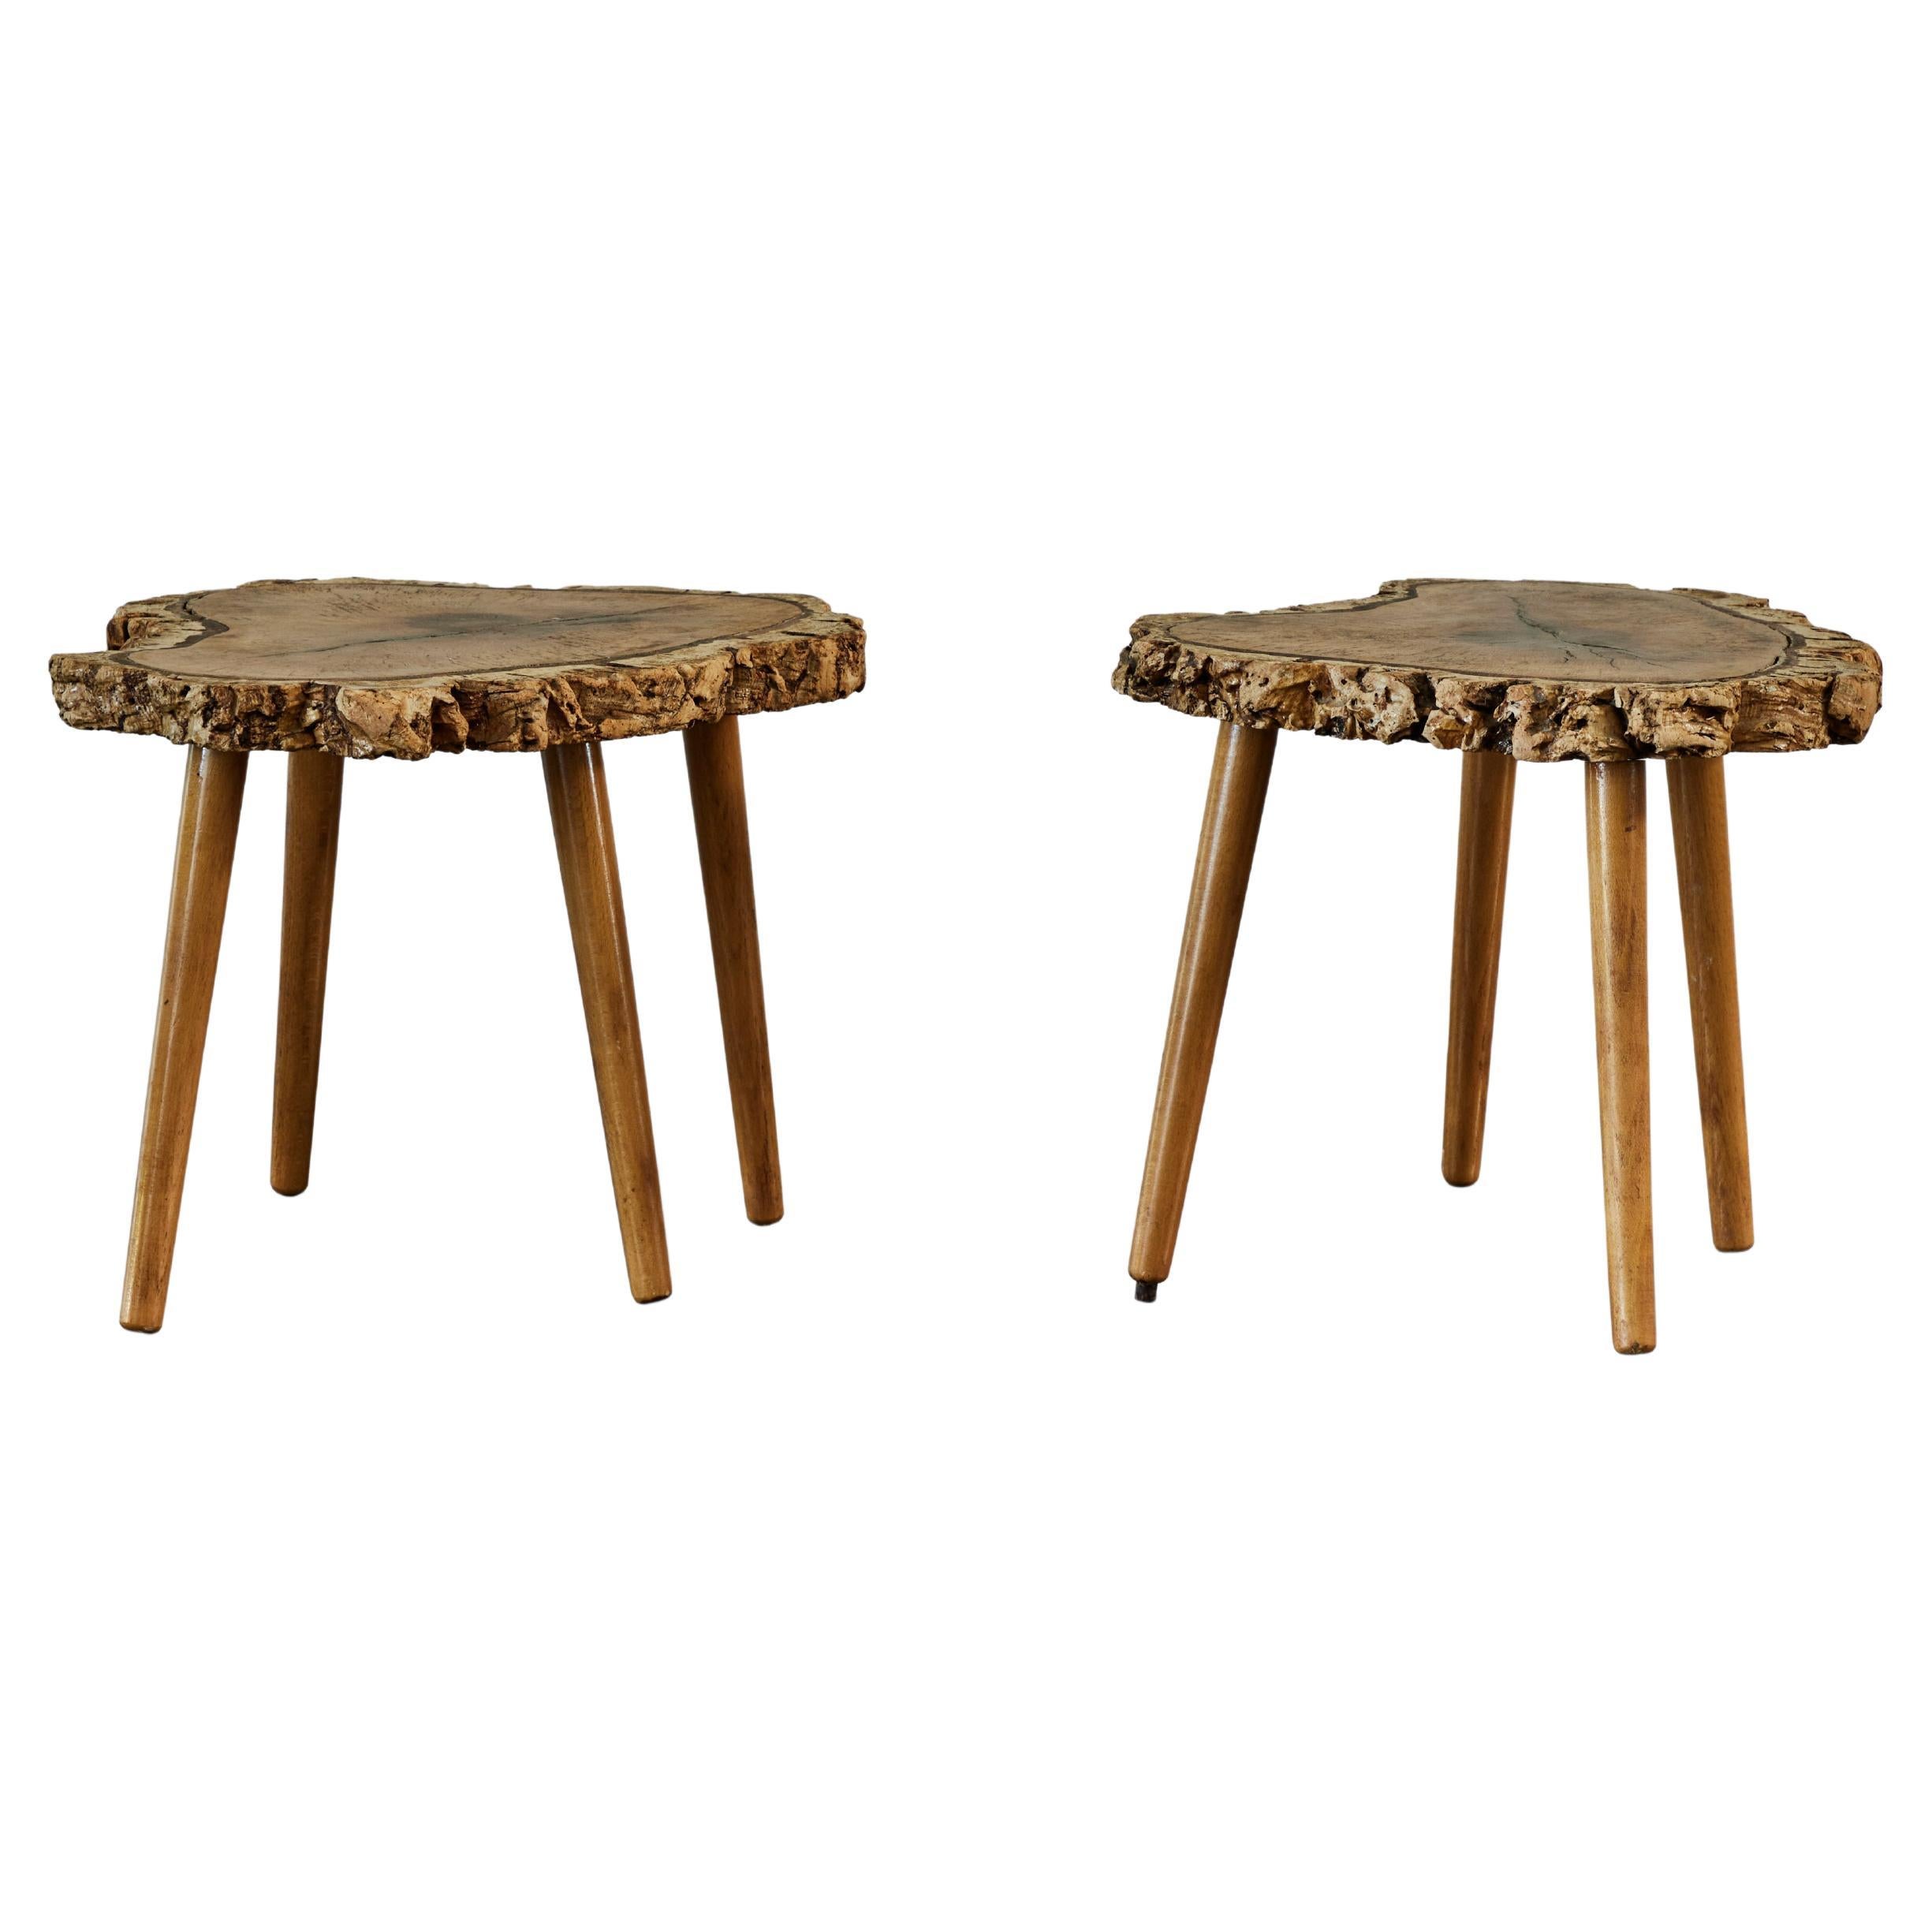 Pair of French Midcentury Live Edge Wood Tables